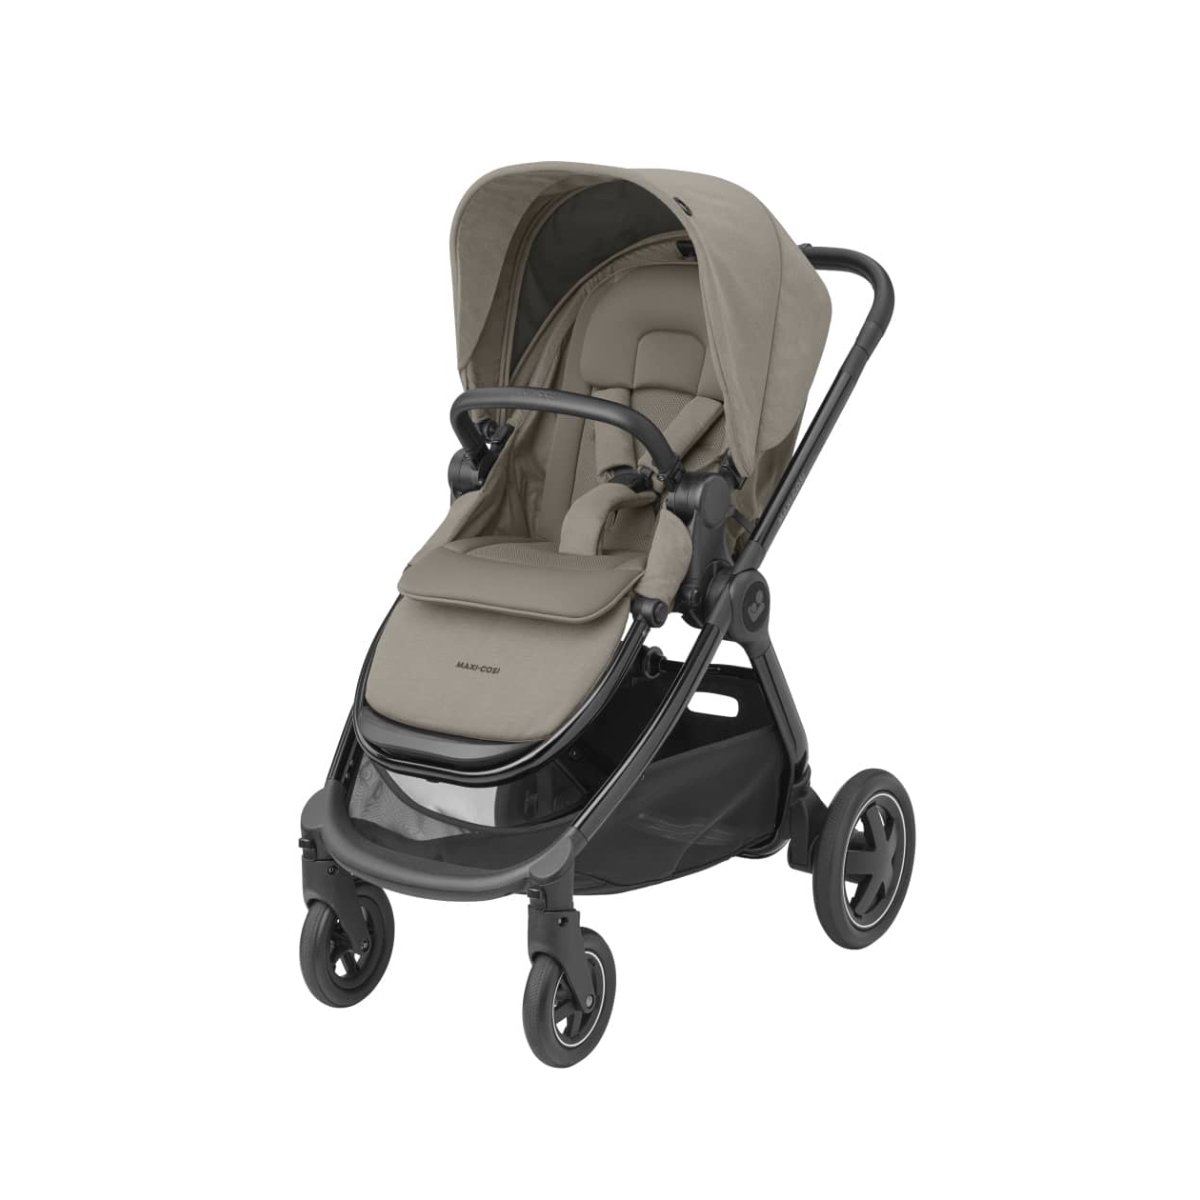 Maxi Cosi Adorra Luxe Stroller with Black Chassis